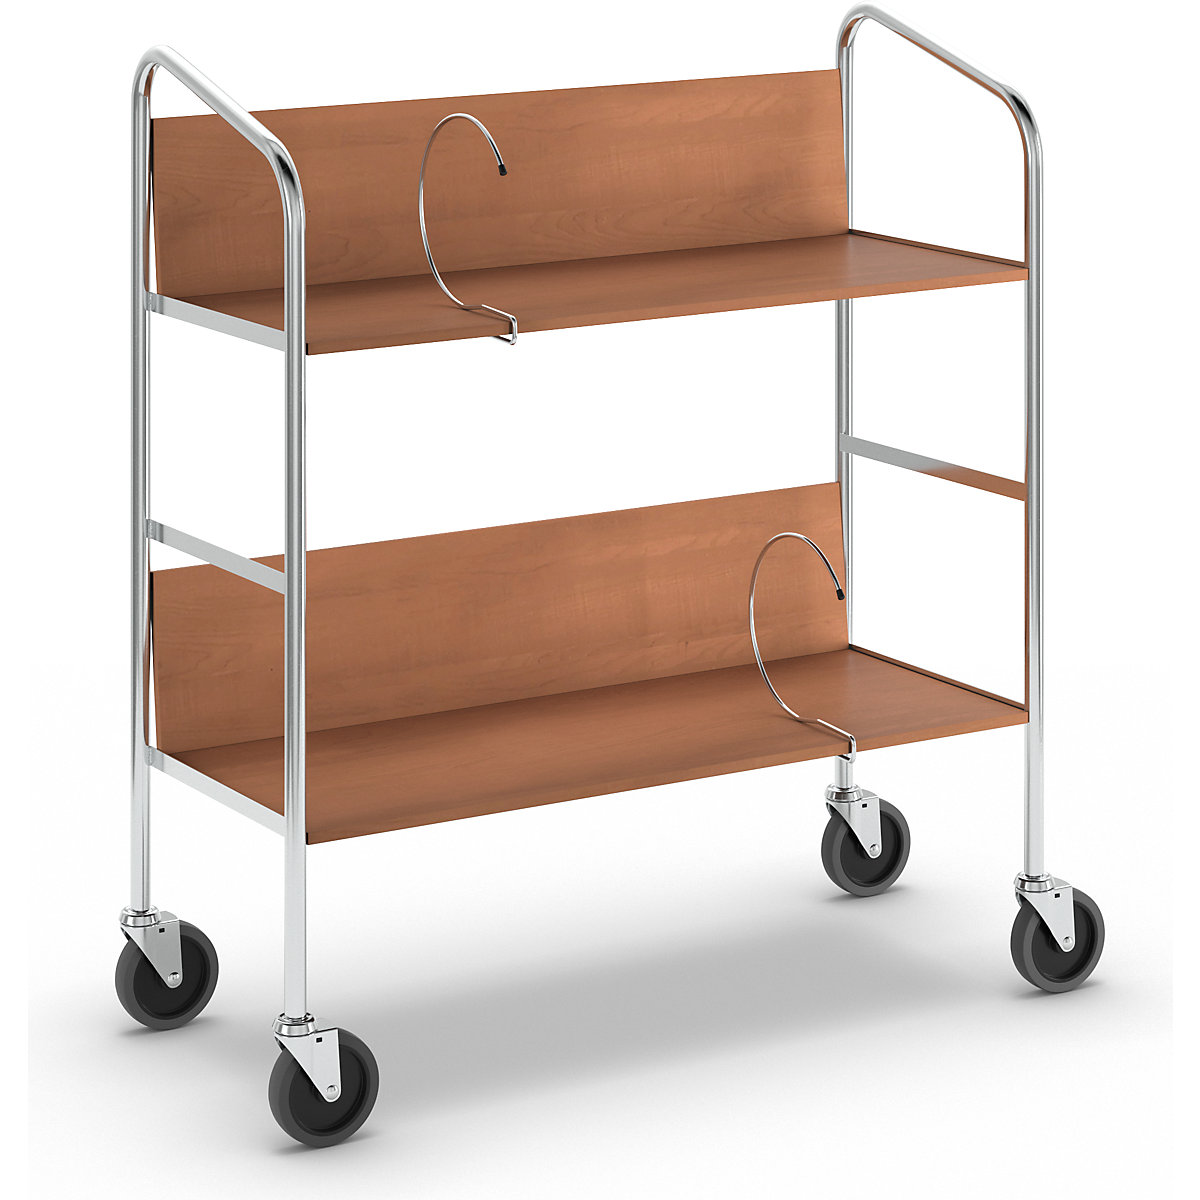 File trolley, chrome plated – HelgeNyberg, 2 shelves, LxWxH 800 x 340 x 840 mm, cherry finish-3